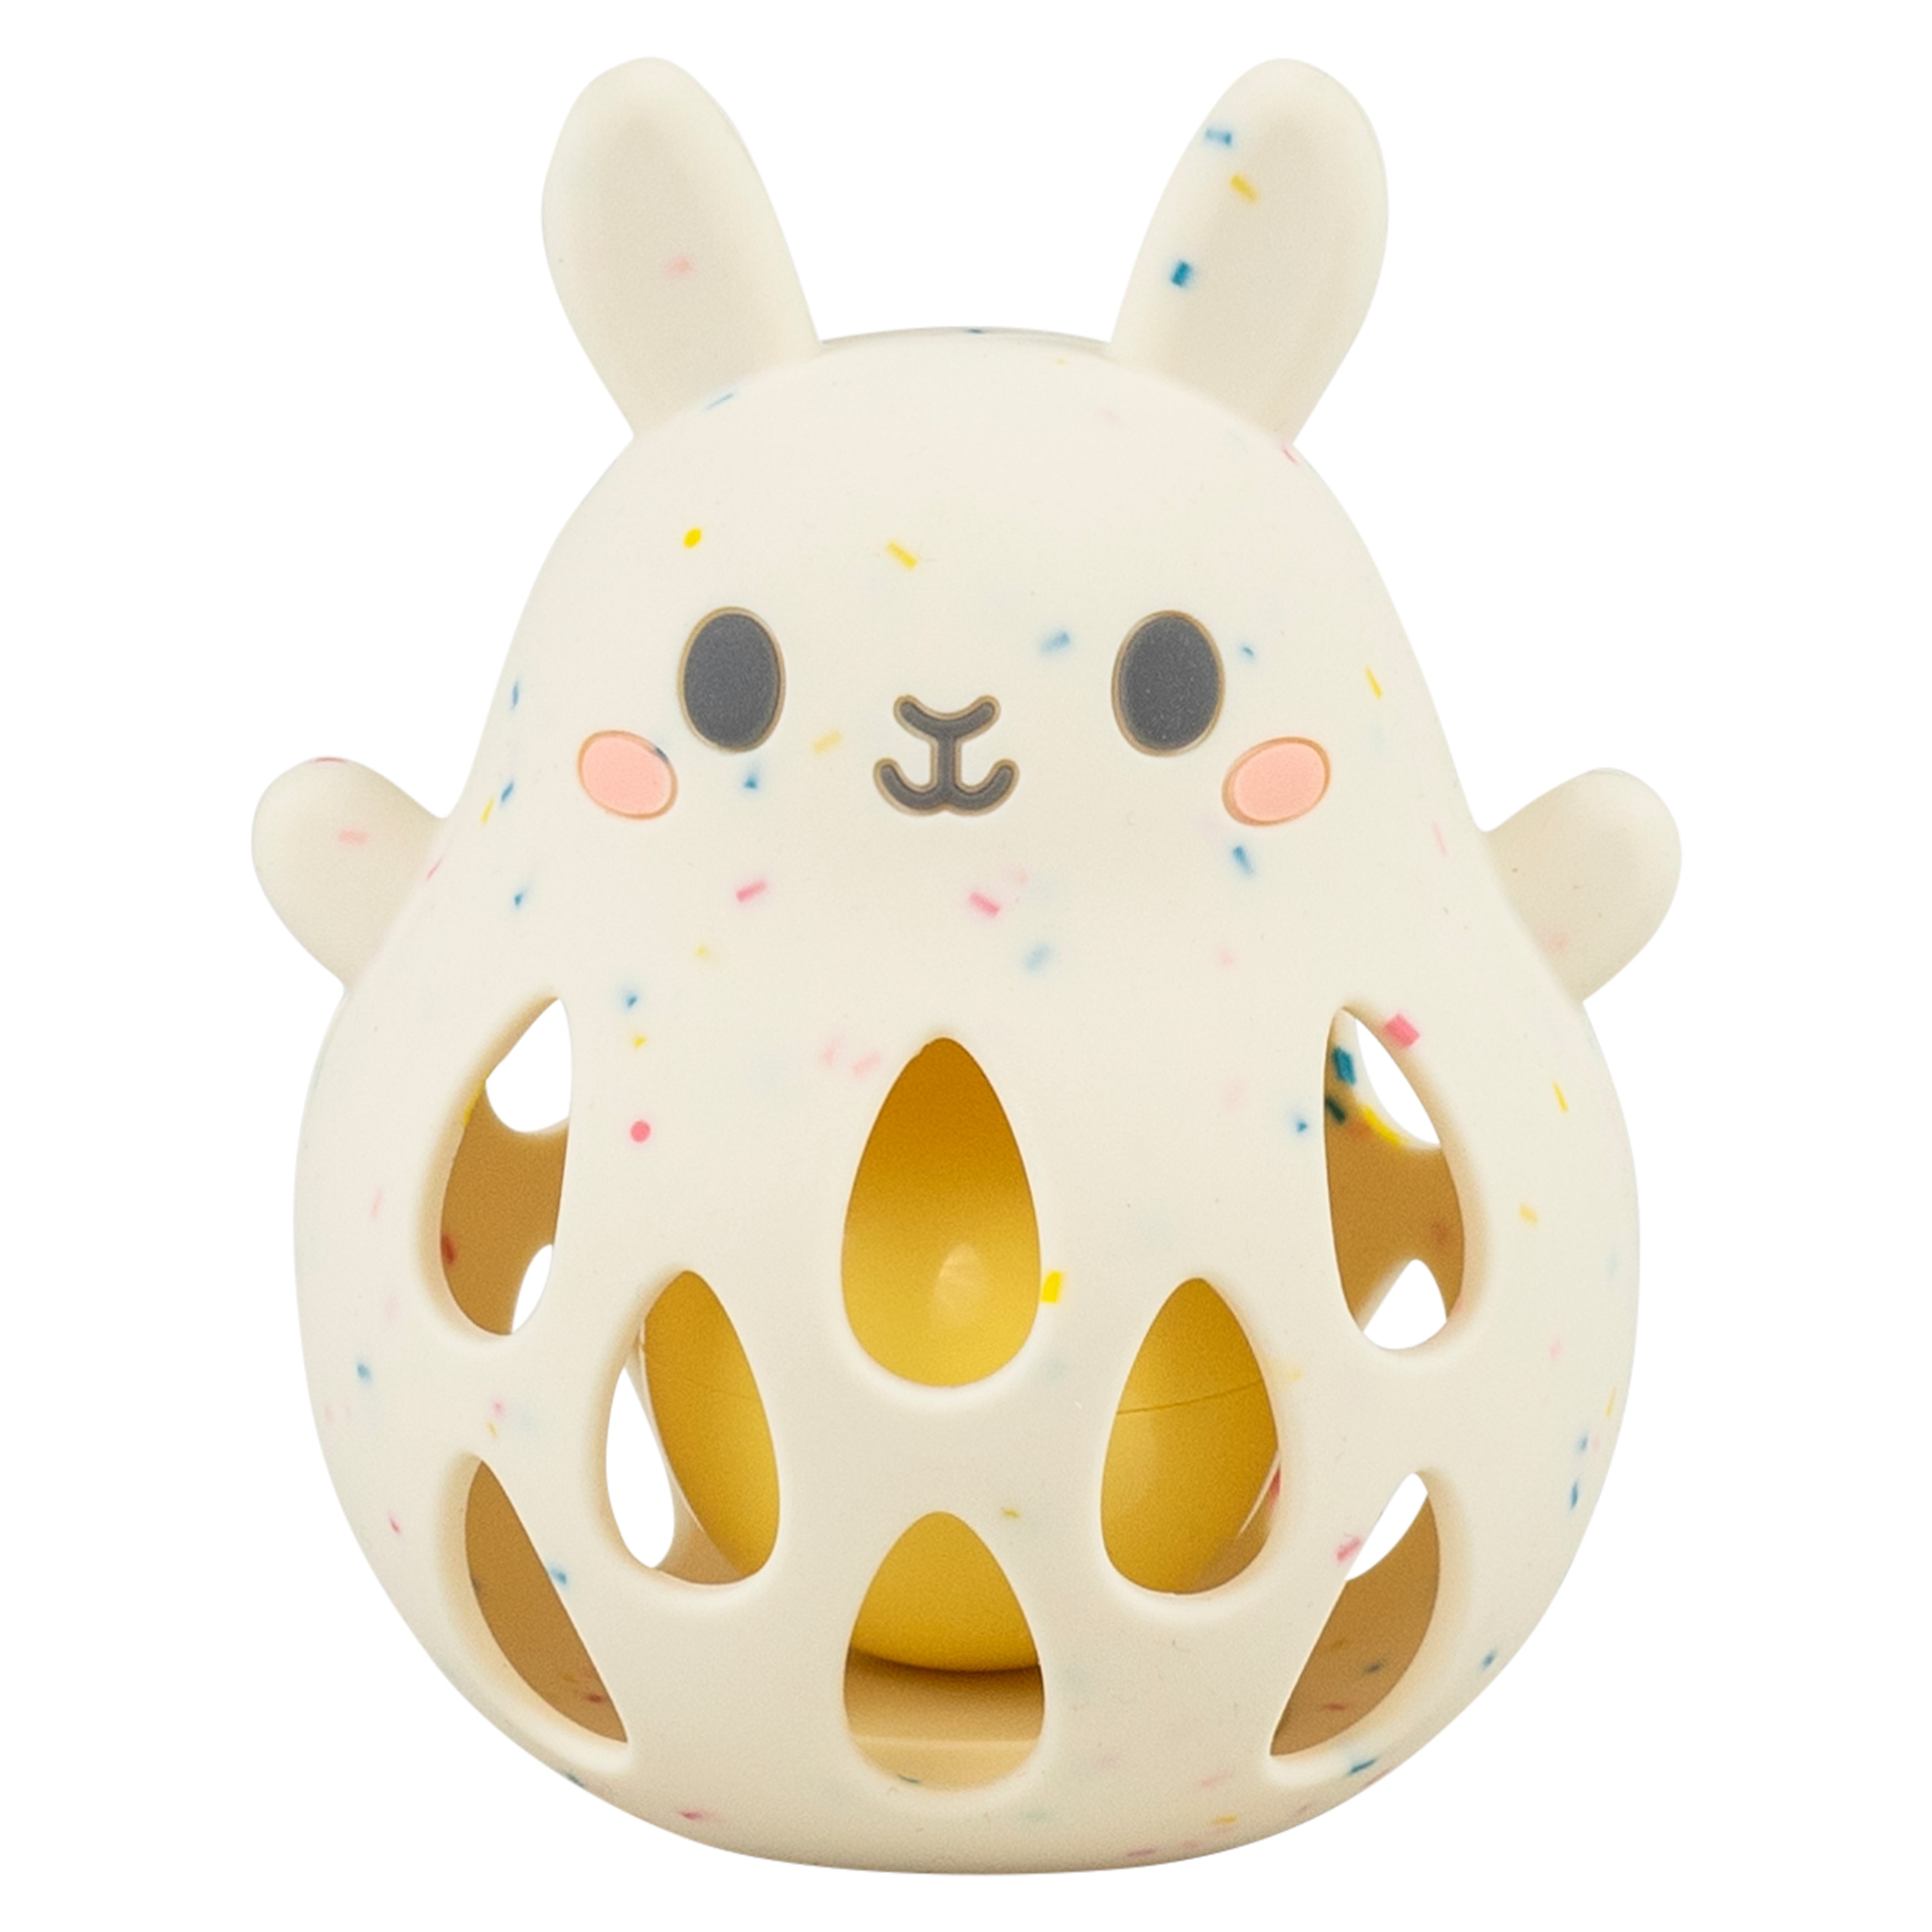 Tiger Tribe Silicone Rattle - Bunny